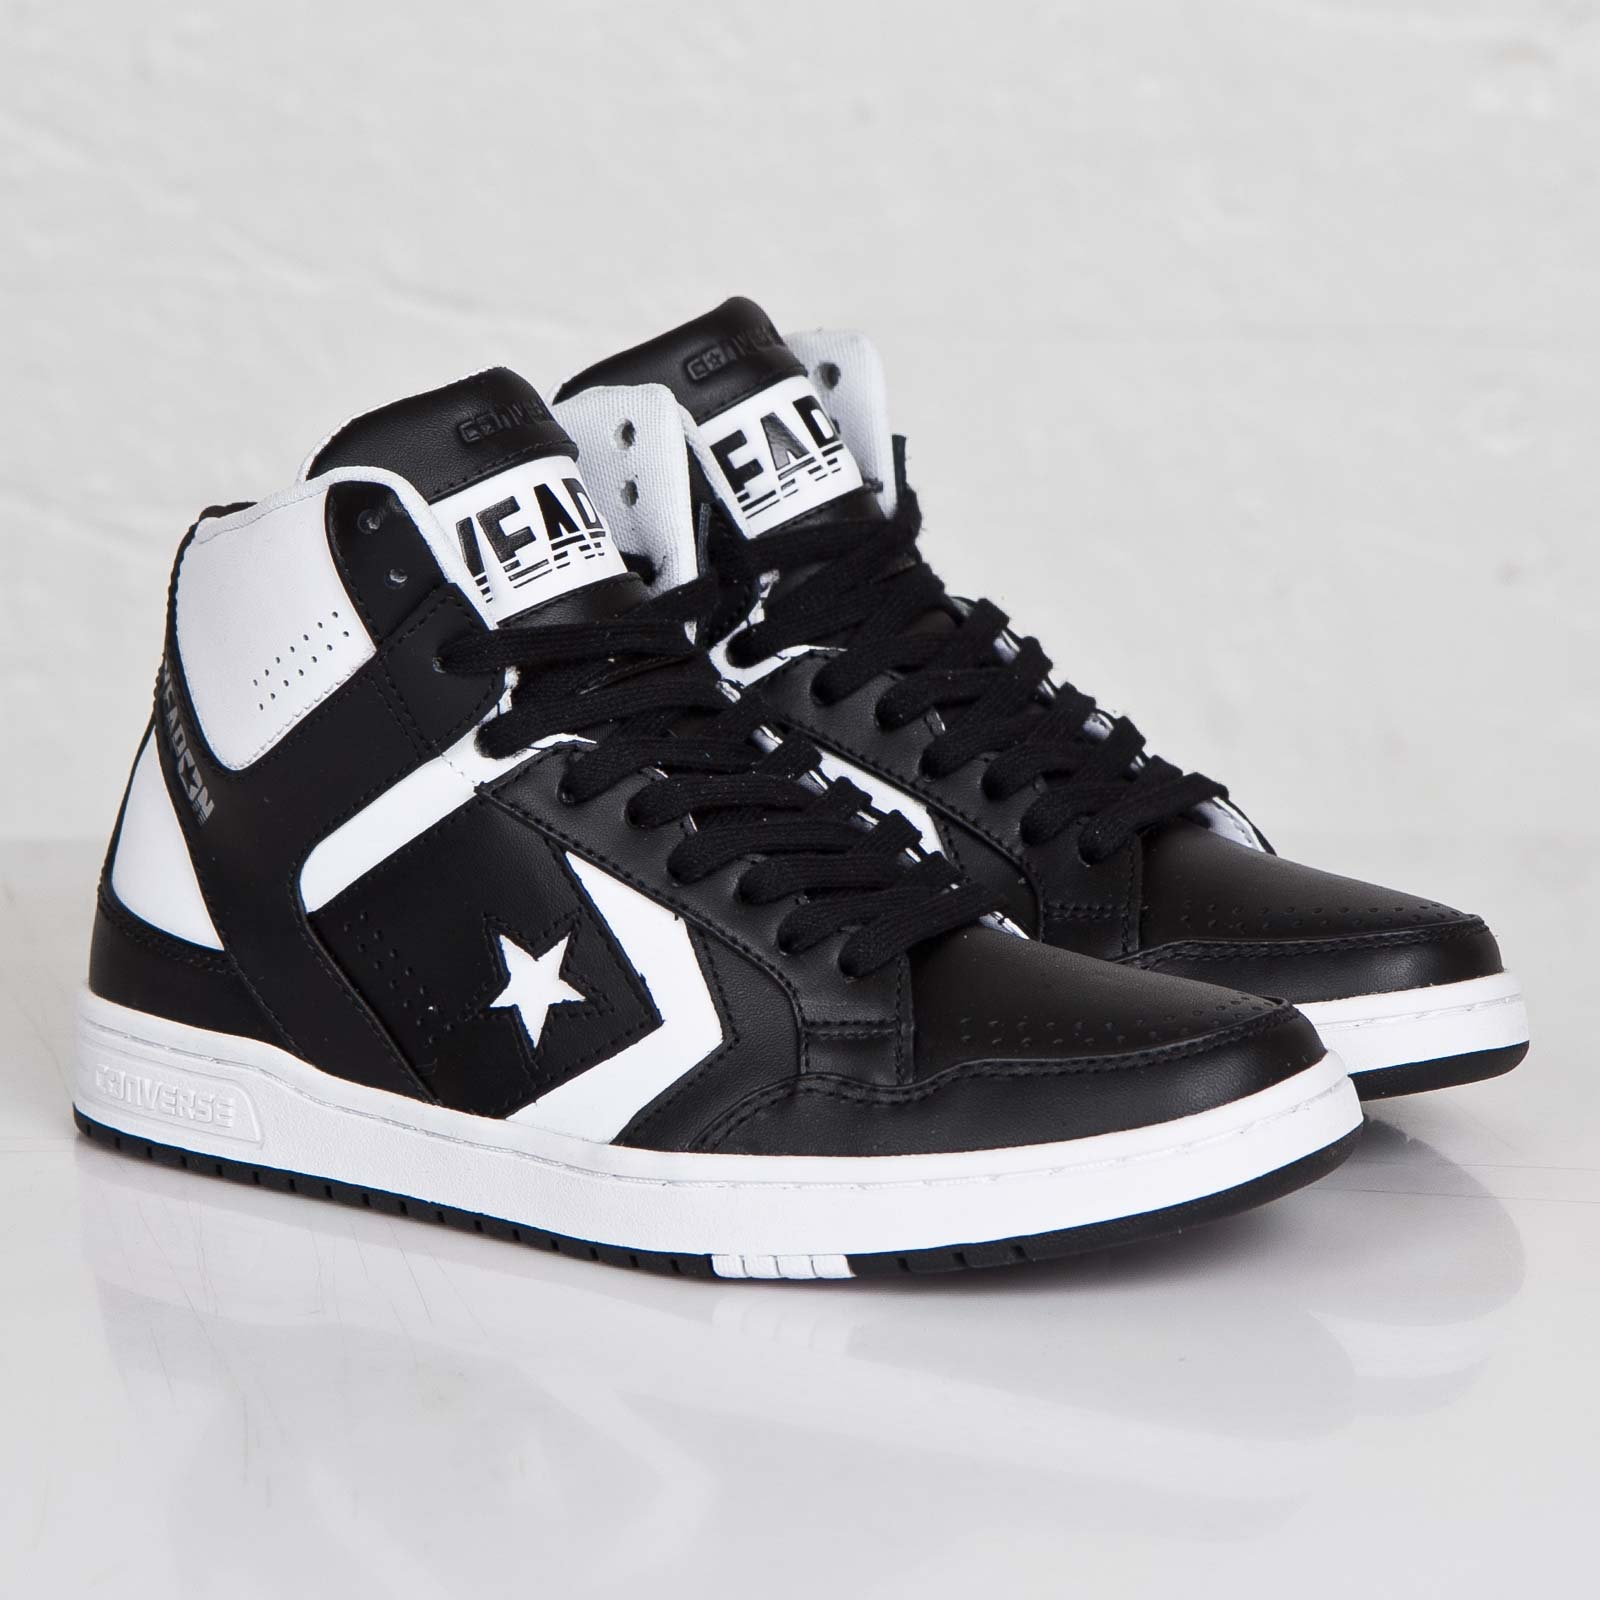 Converse Weapon mid